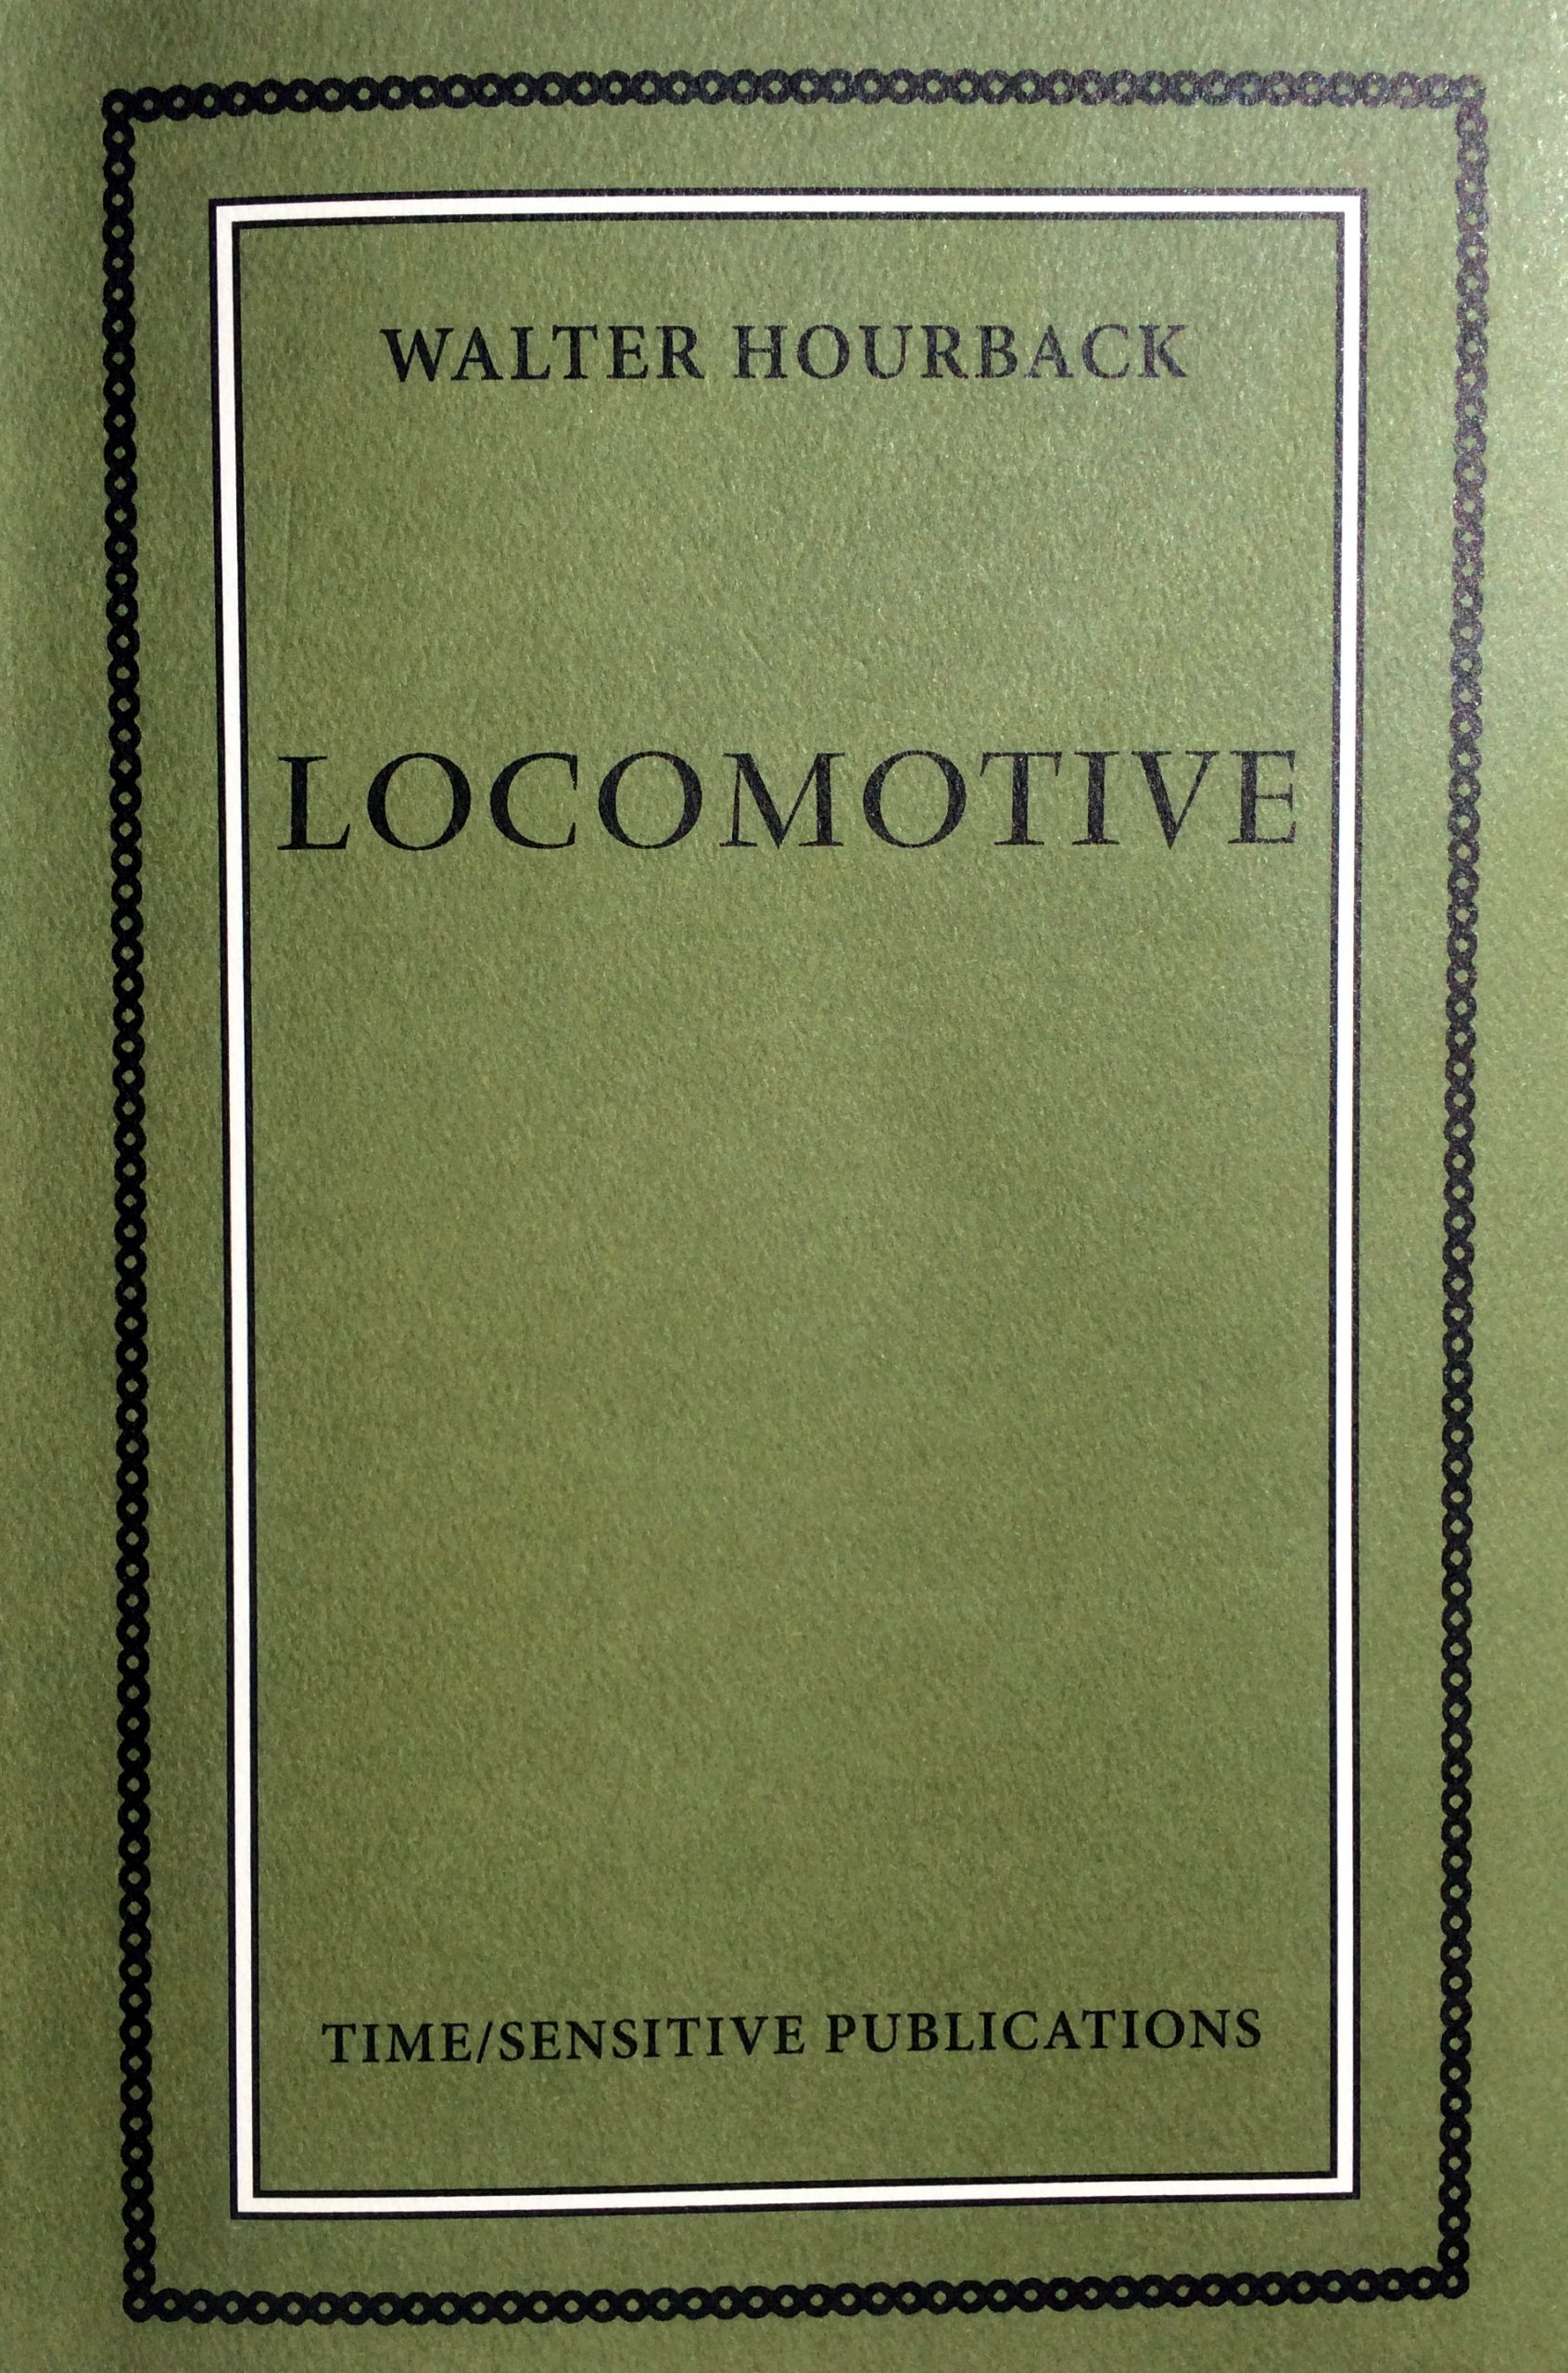 Book cover, Locomotive by Wallter Hourback